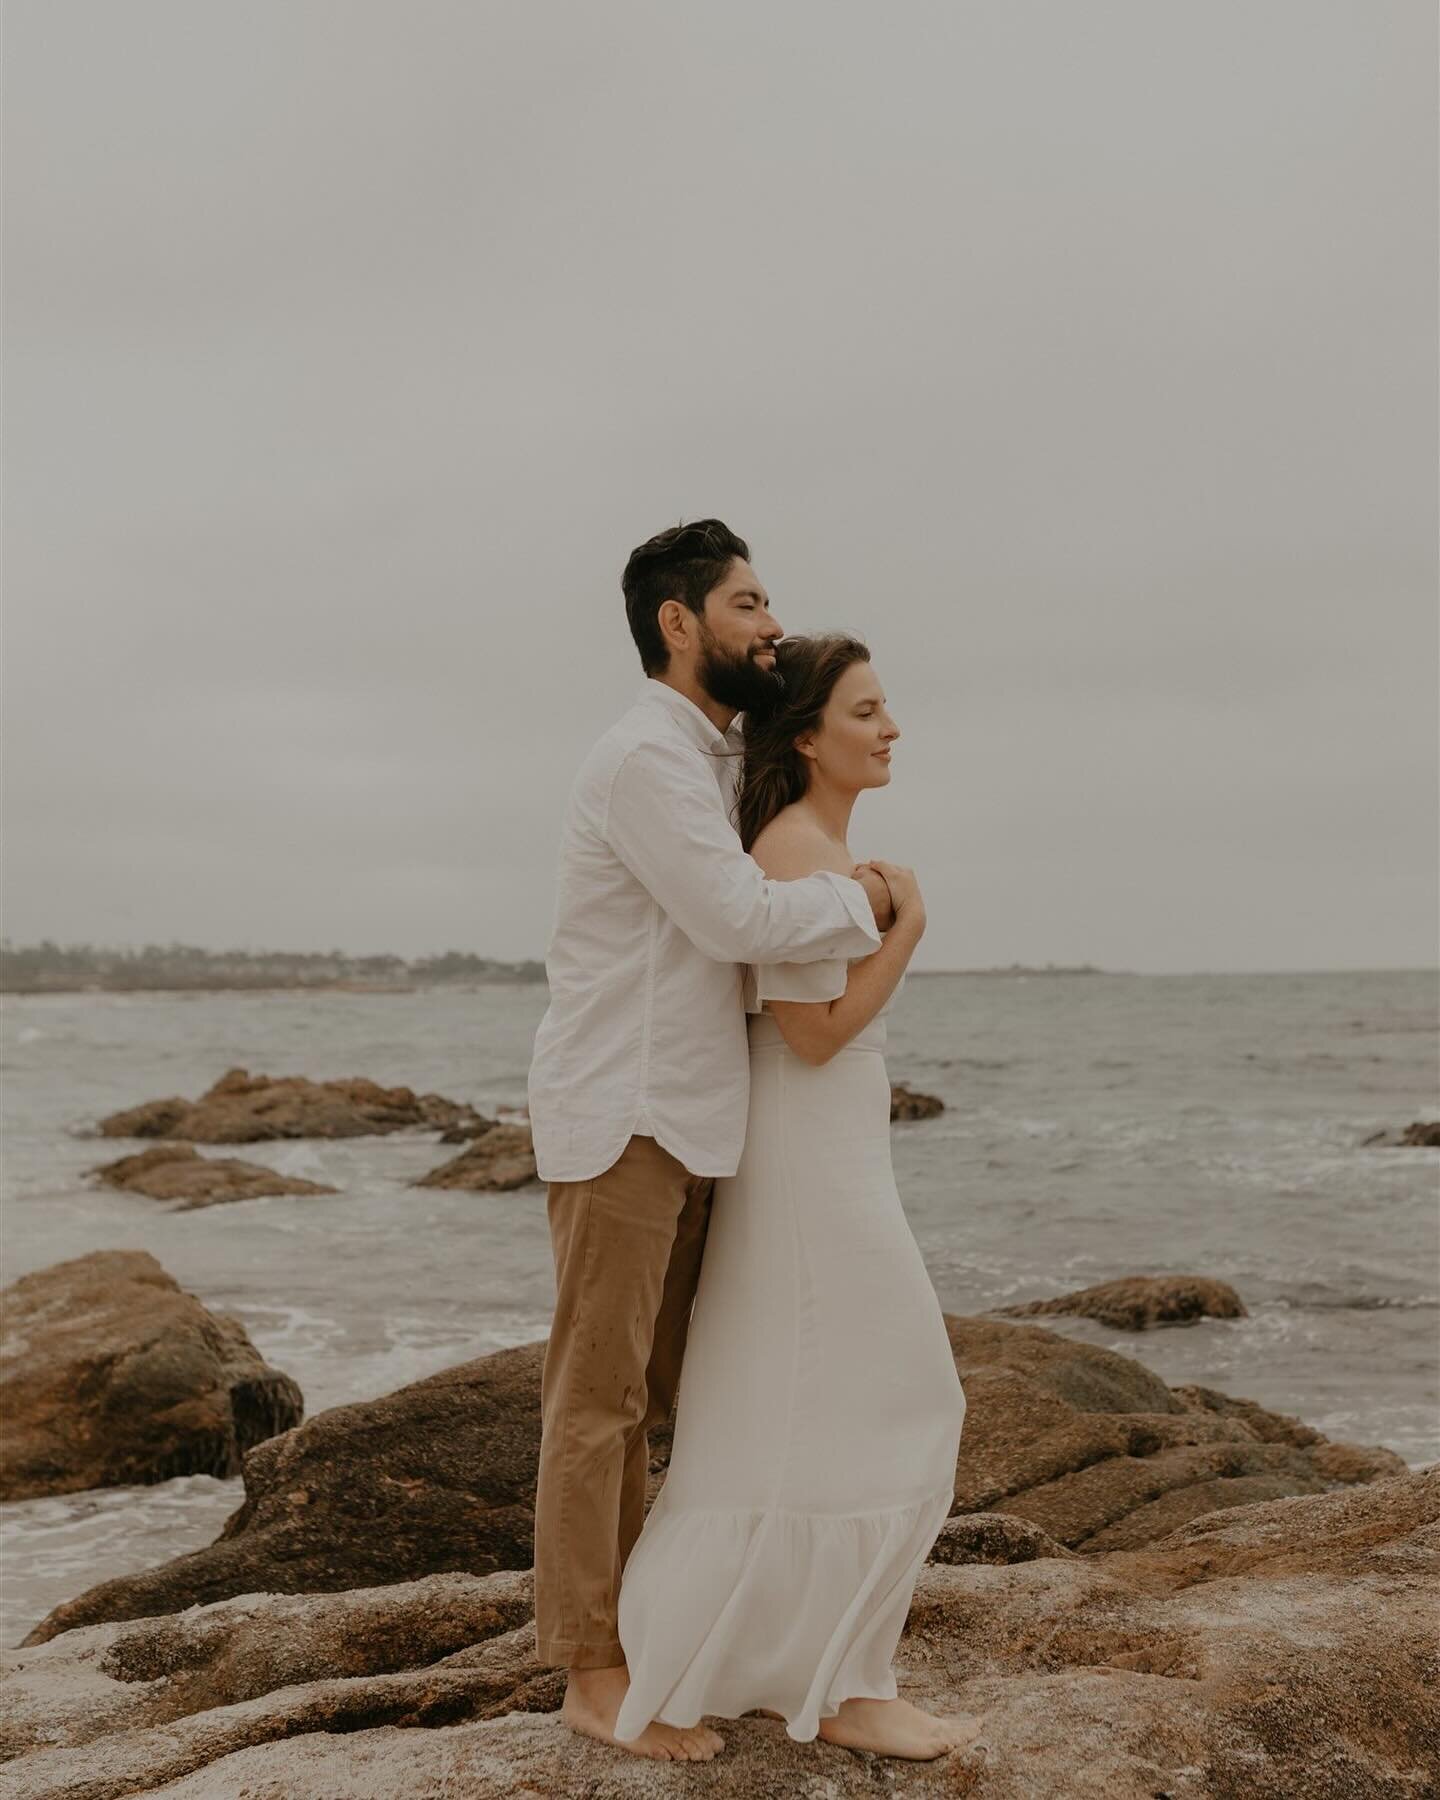 Lost in the tide, found in each other 🤍
.
.
.
.
#minraephoto #pacificgrove #pacificgrovephotographer #monterey #montereyphotographer #montereyweddingphotographer #bayareaphotographer #sfphotographer #bayareaweddingphotographer #sfweddingphotographer